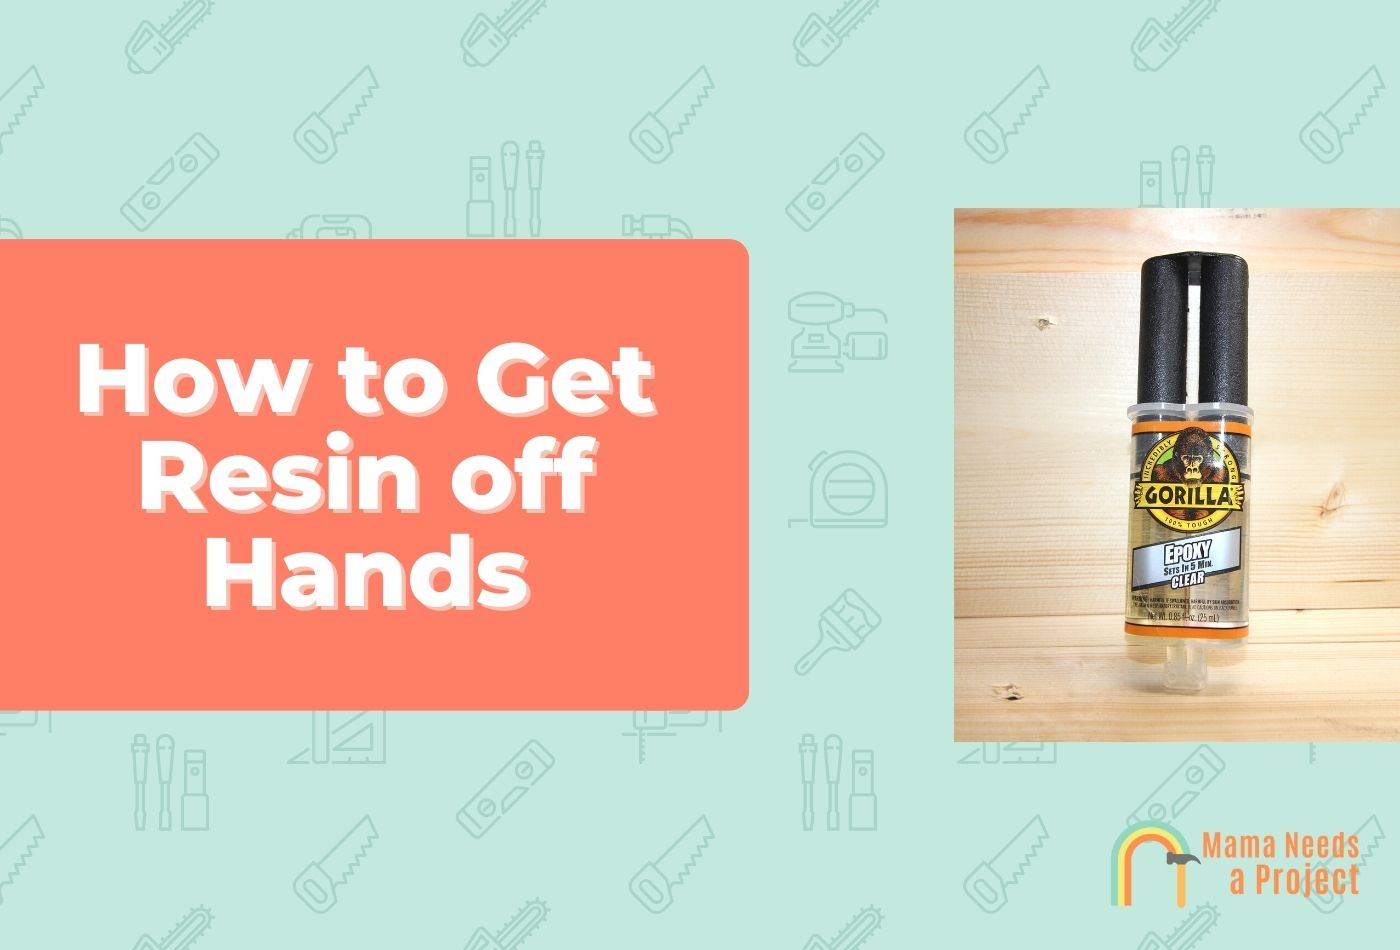 How to Get Resin off Hands